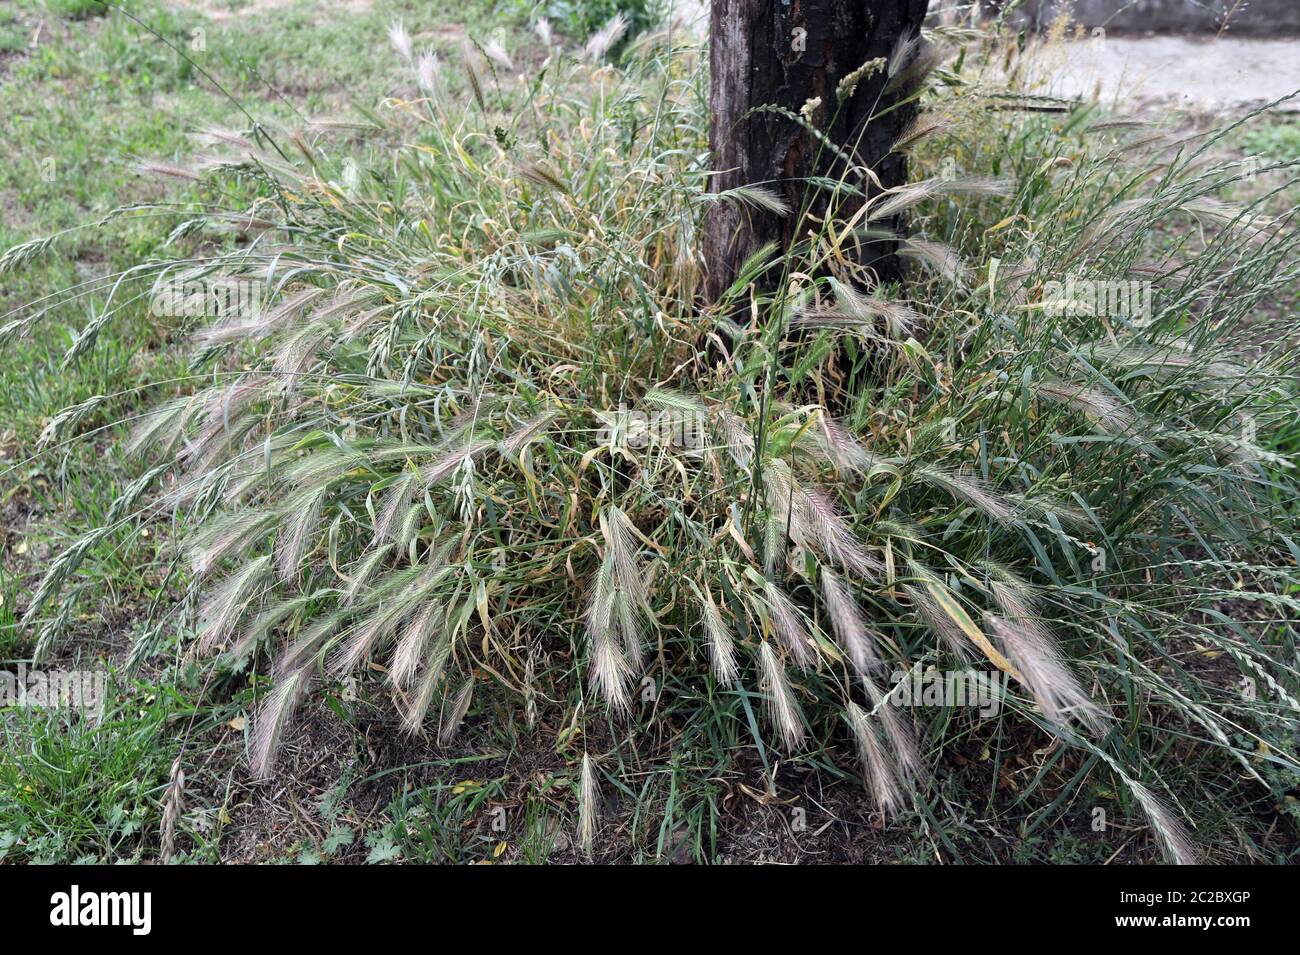 Grass awns in the garden that can be dangerous for dogs. June grass ears. Stock Photo